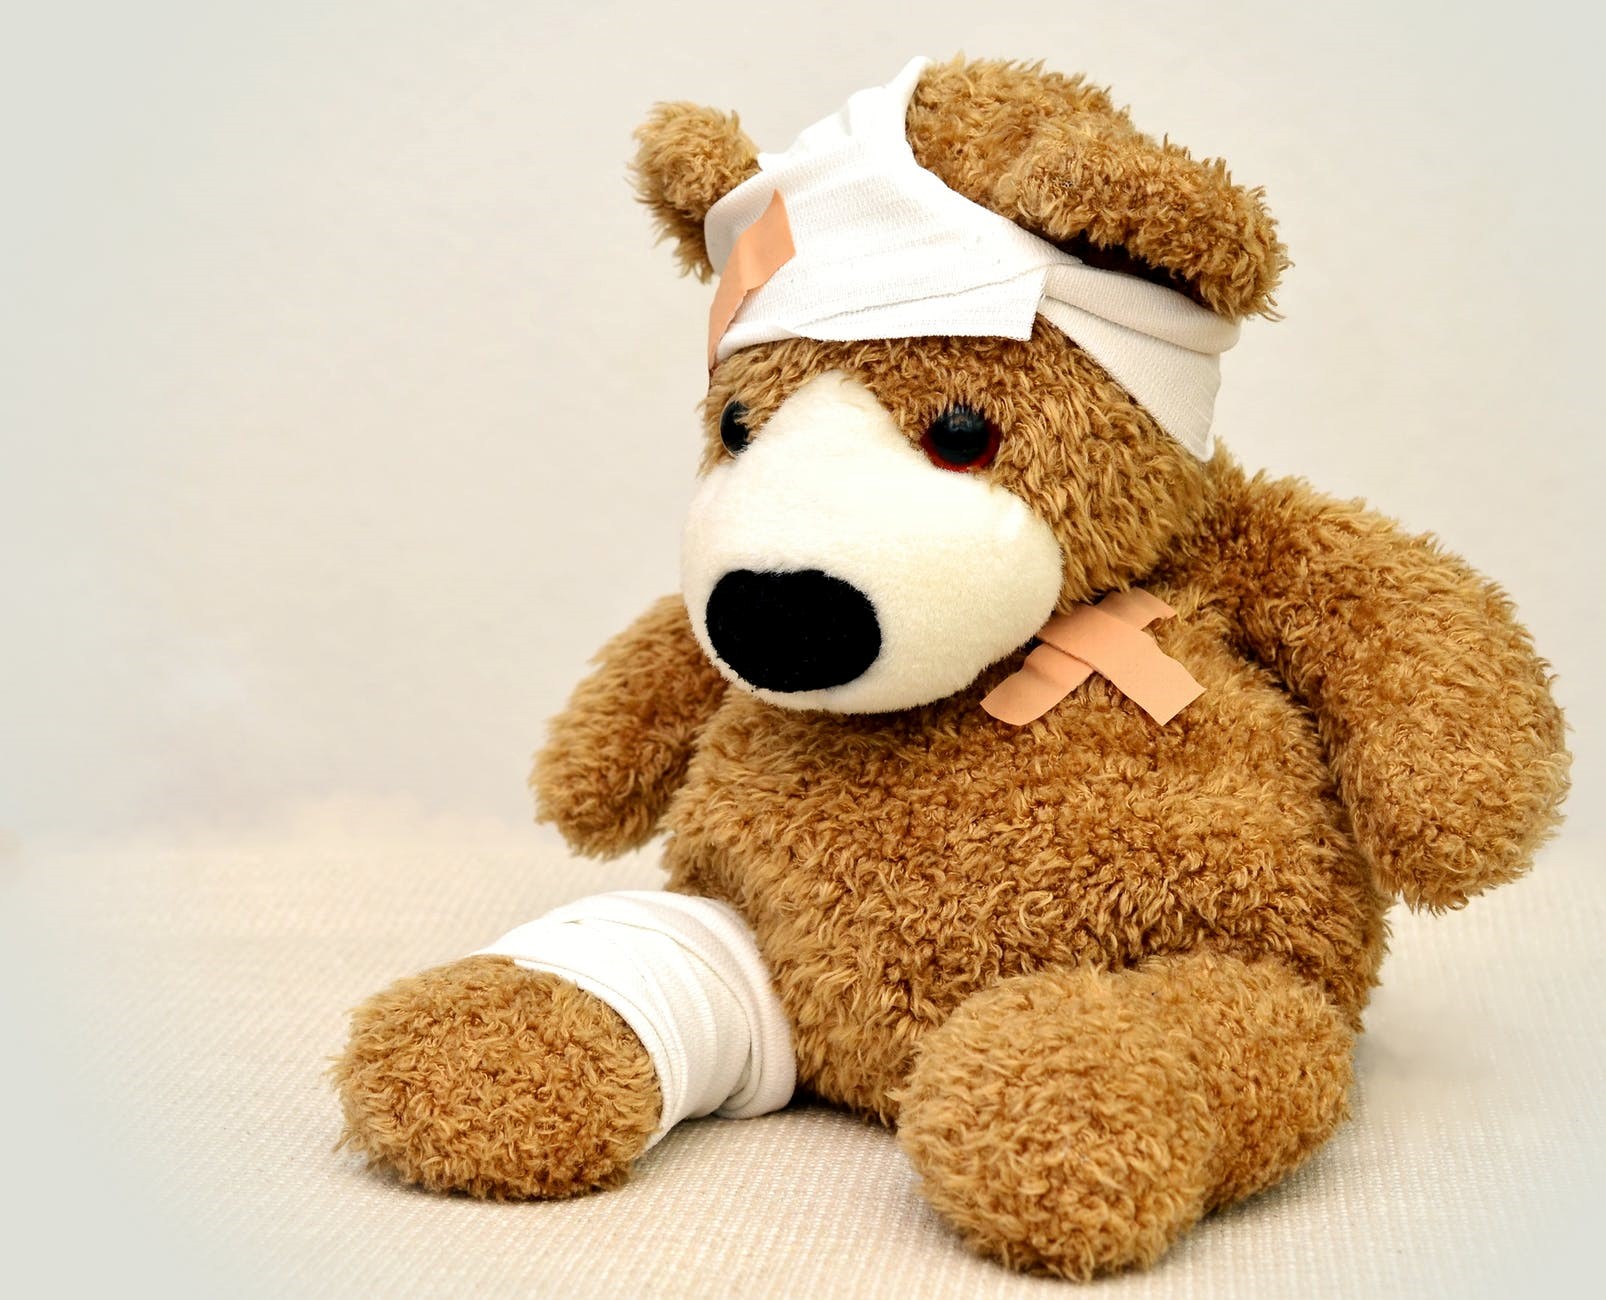 photo of a teddy bear with a bandage